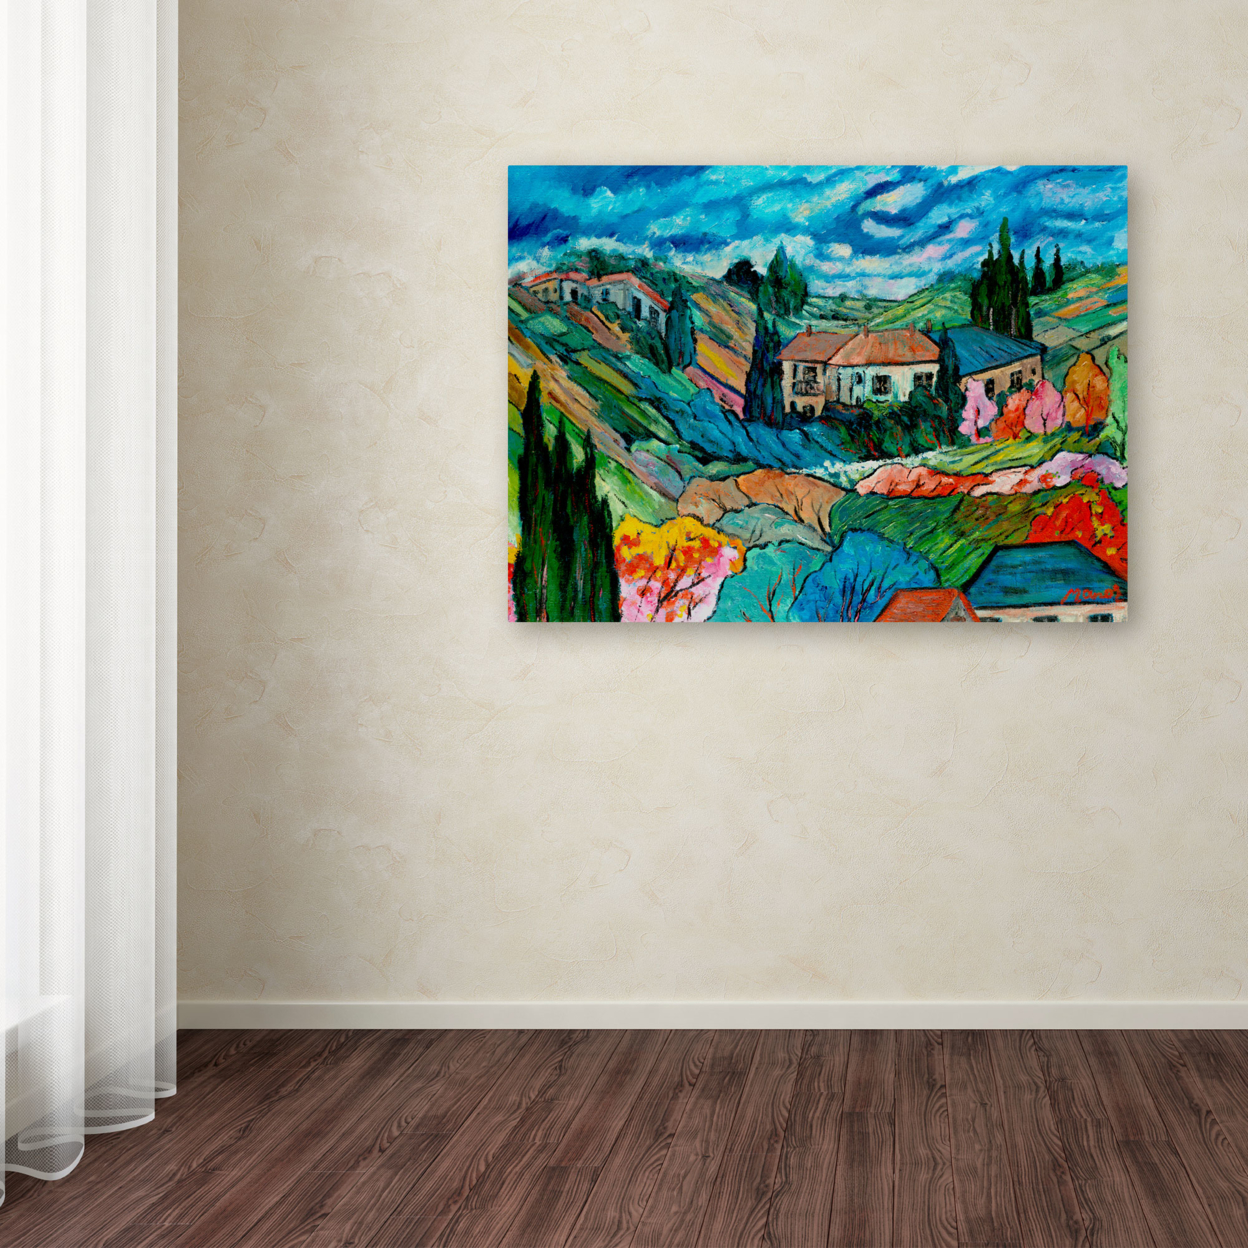 Manor Shadian 'Valley House' Canvas Wall Art 35 X 47 Inches